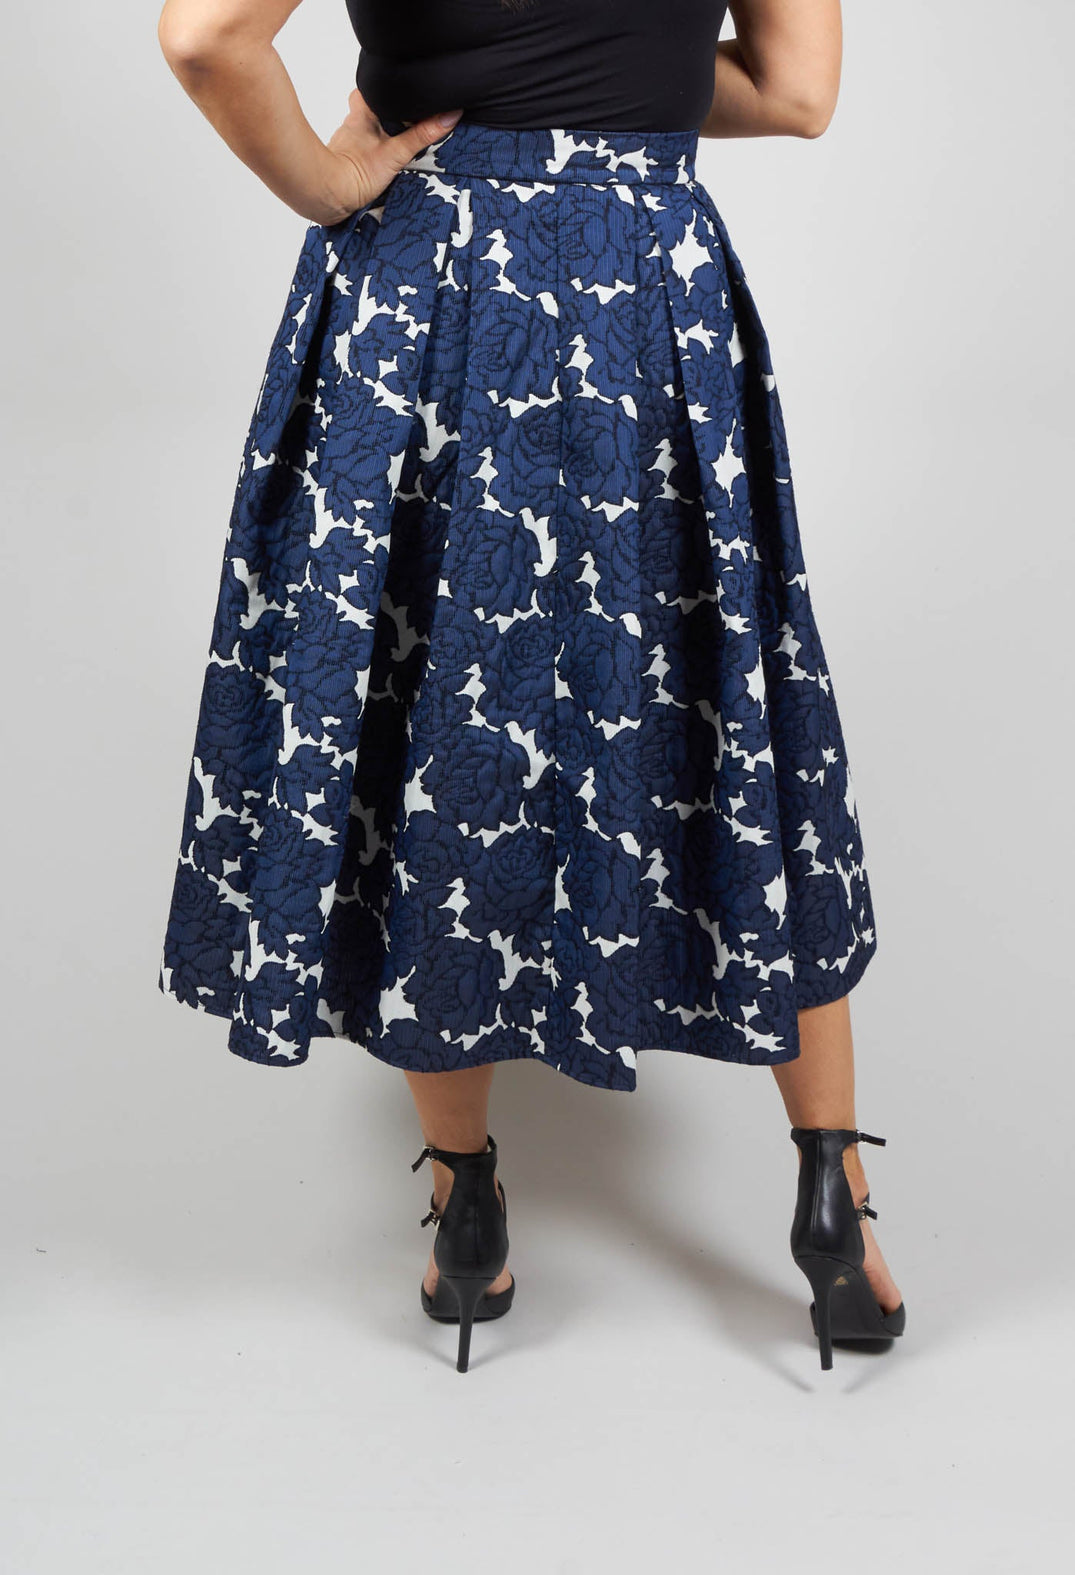 Abey Skirt in Floral Blue